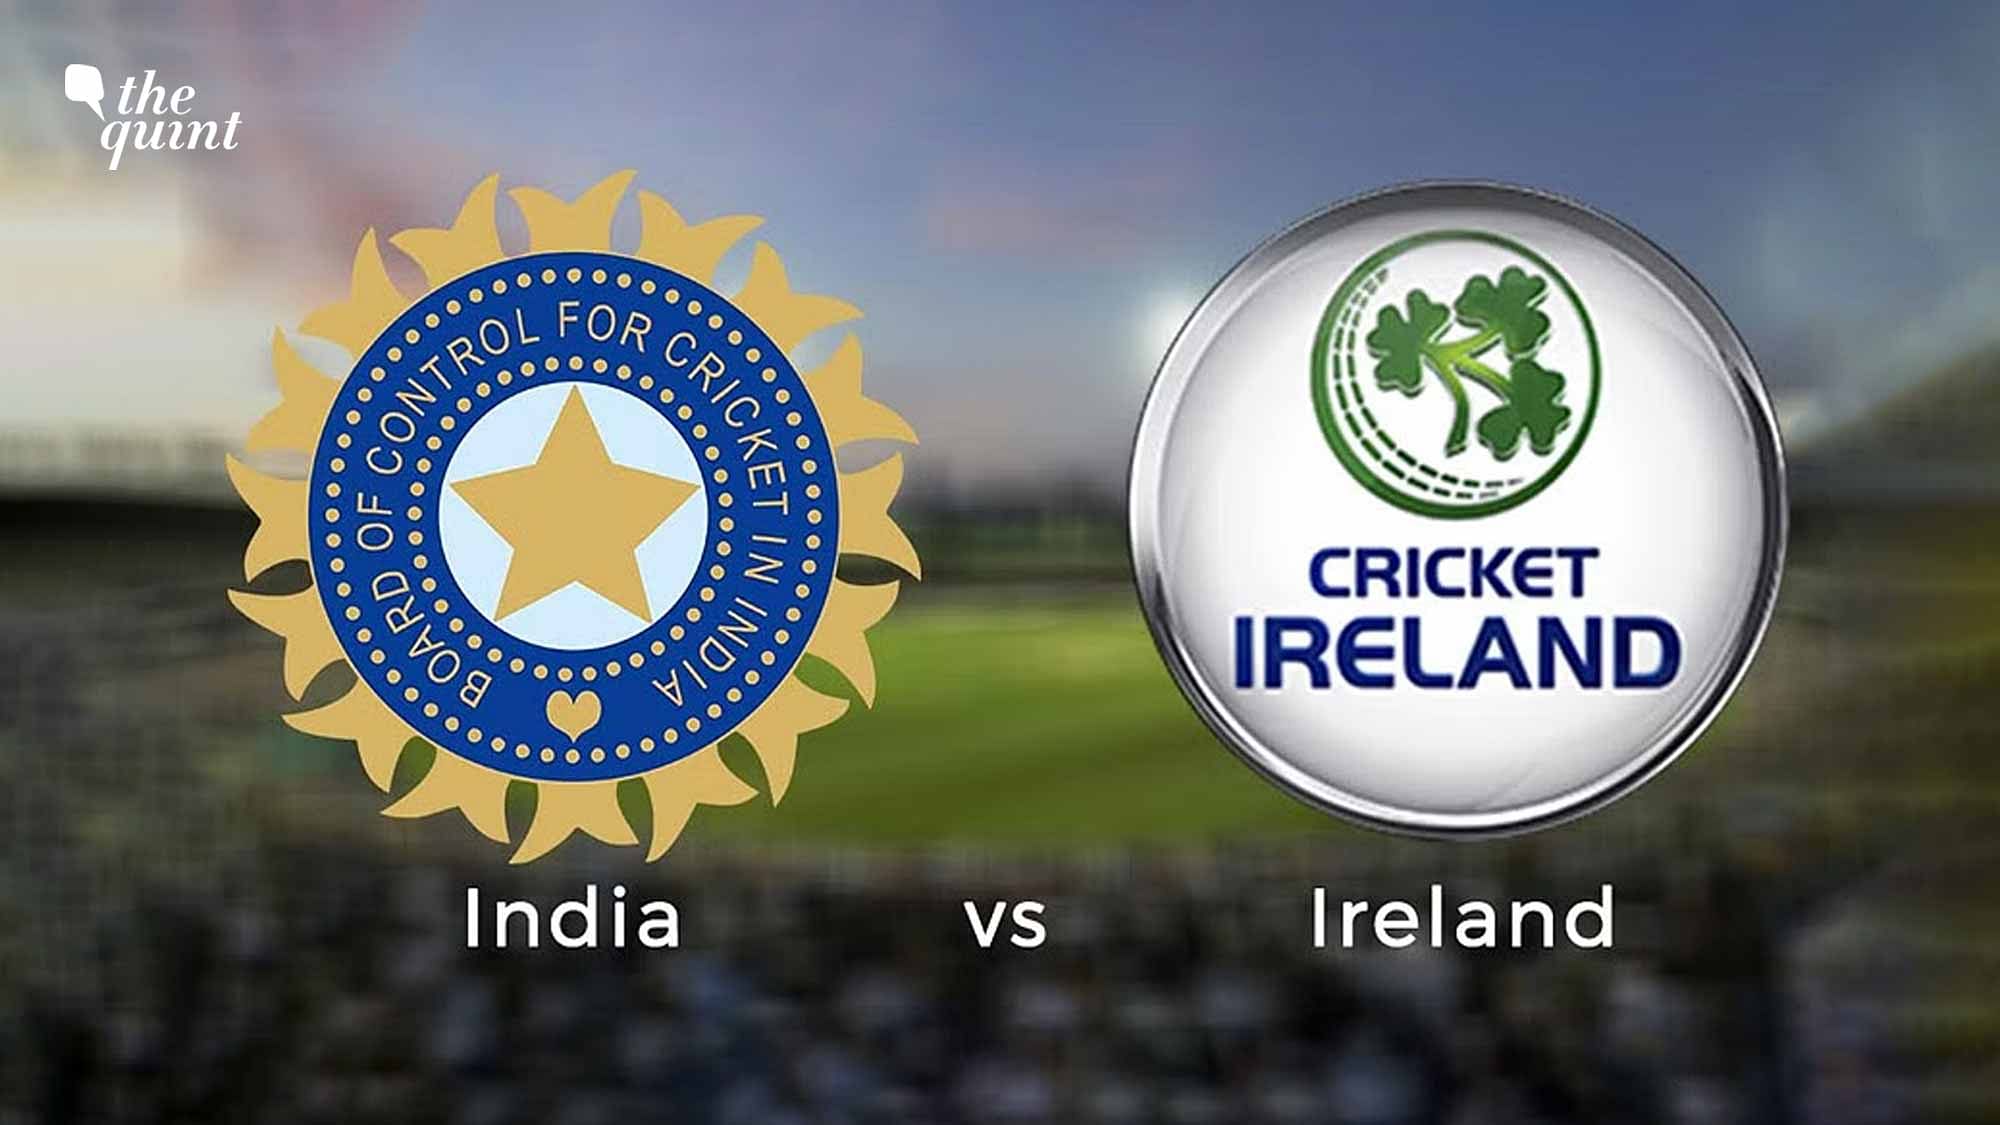 India vs Ireland T20I Series 2023 IND vs IRE Schedule, Fixtures, Matches, Venues, Team Squads, Live Streaming, Telecast, and More